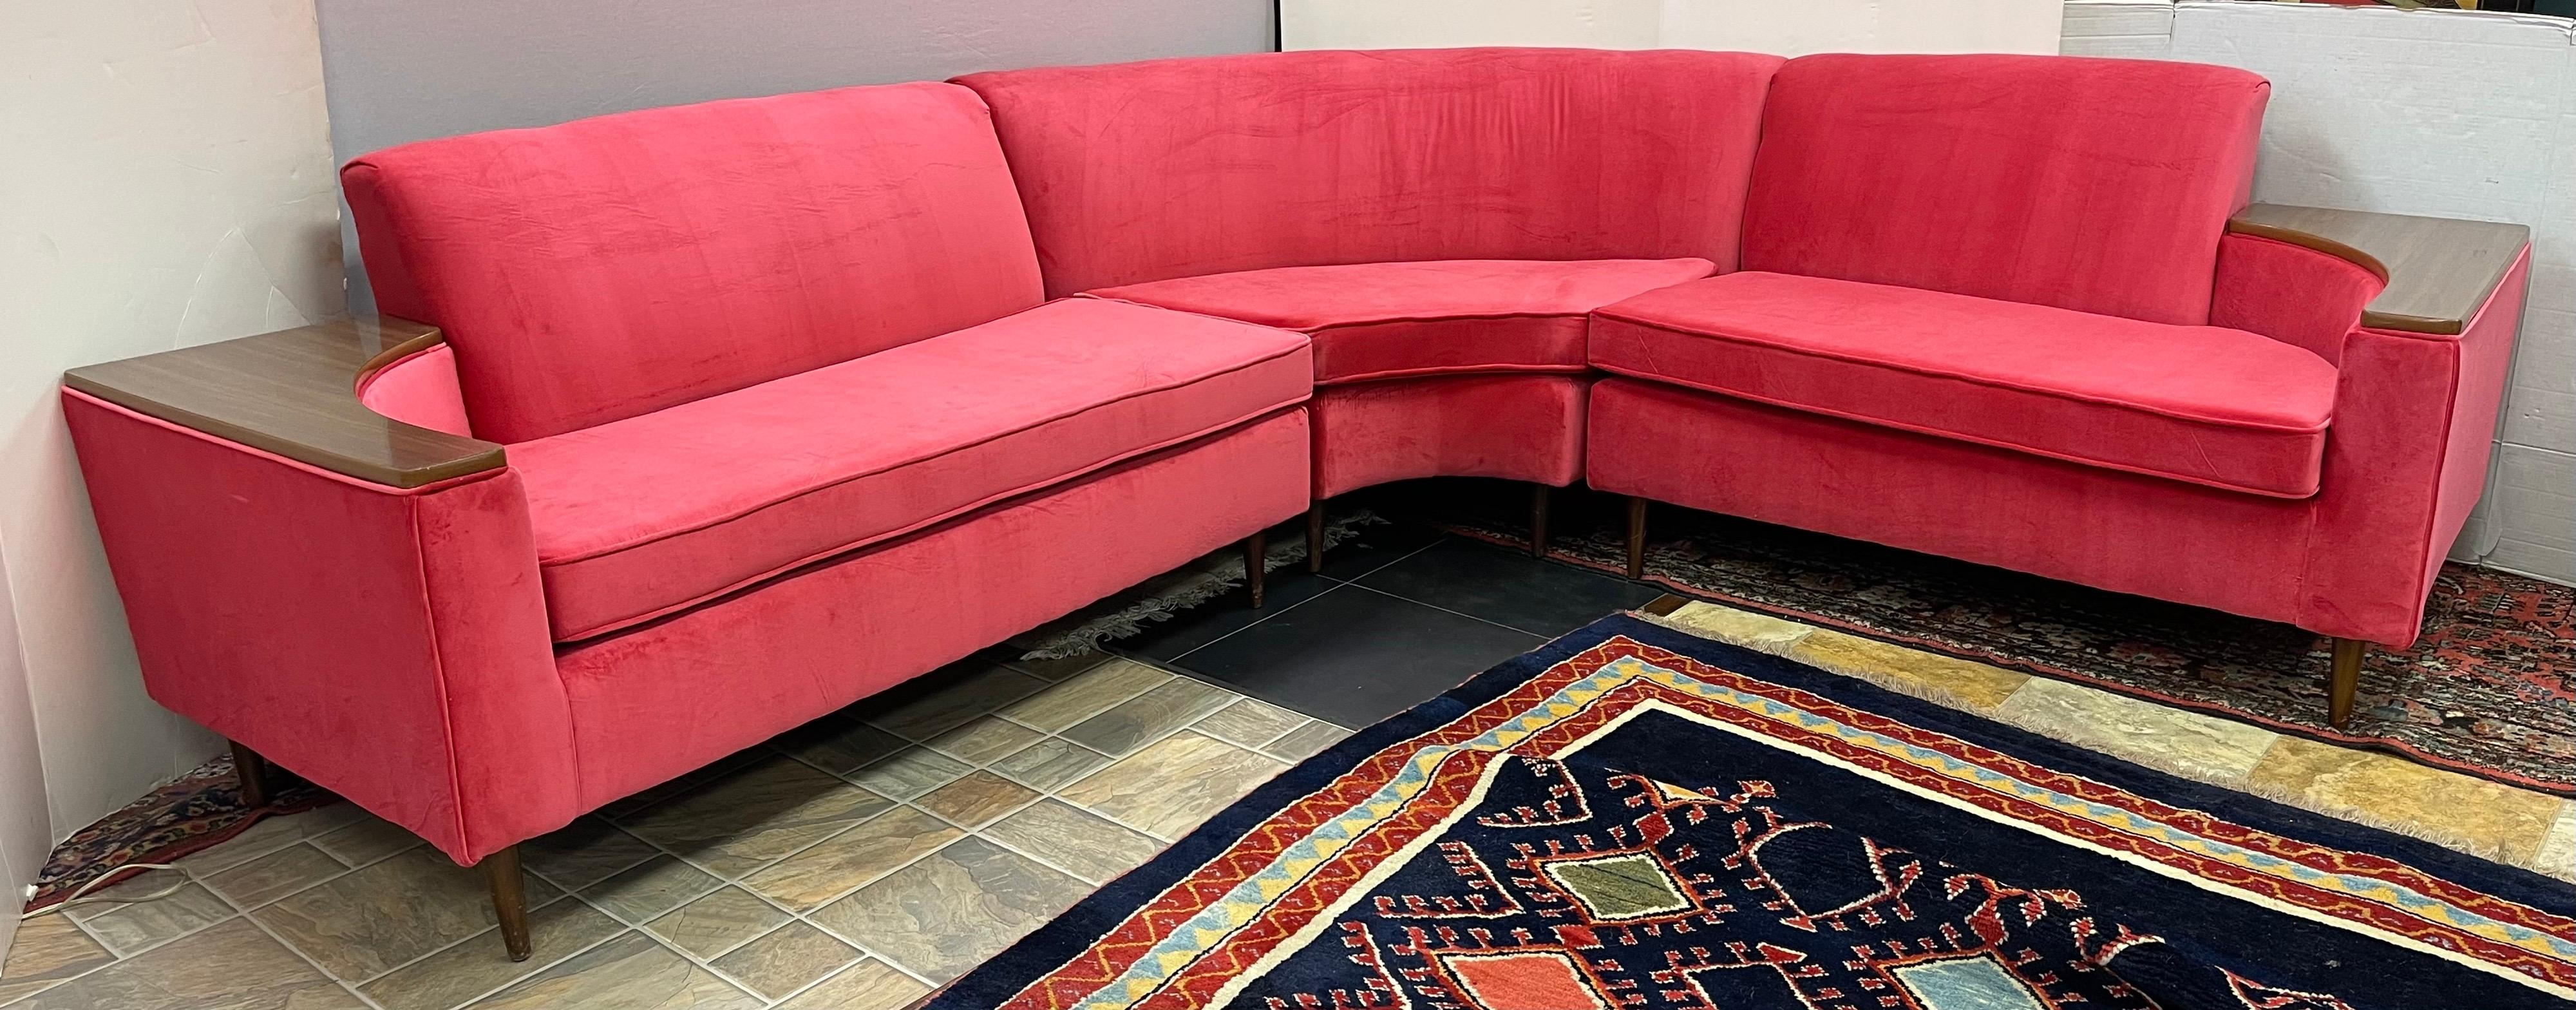 Magnificent Mid-Century Modern three piece sectional sofa with new coral pink velvet upholstery. The dimensions for the entire piece are down below and the three pieces from left to right measure as follows:

-left piece: 58